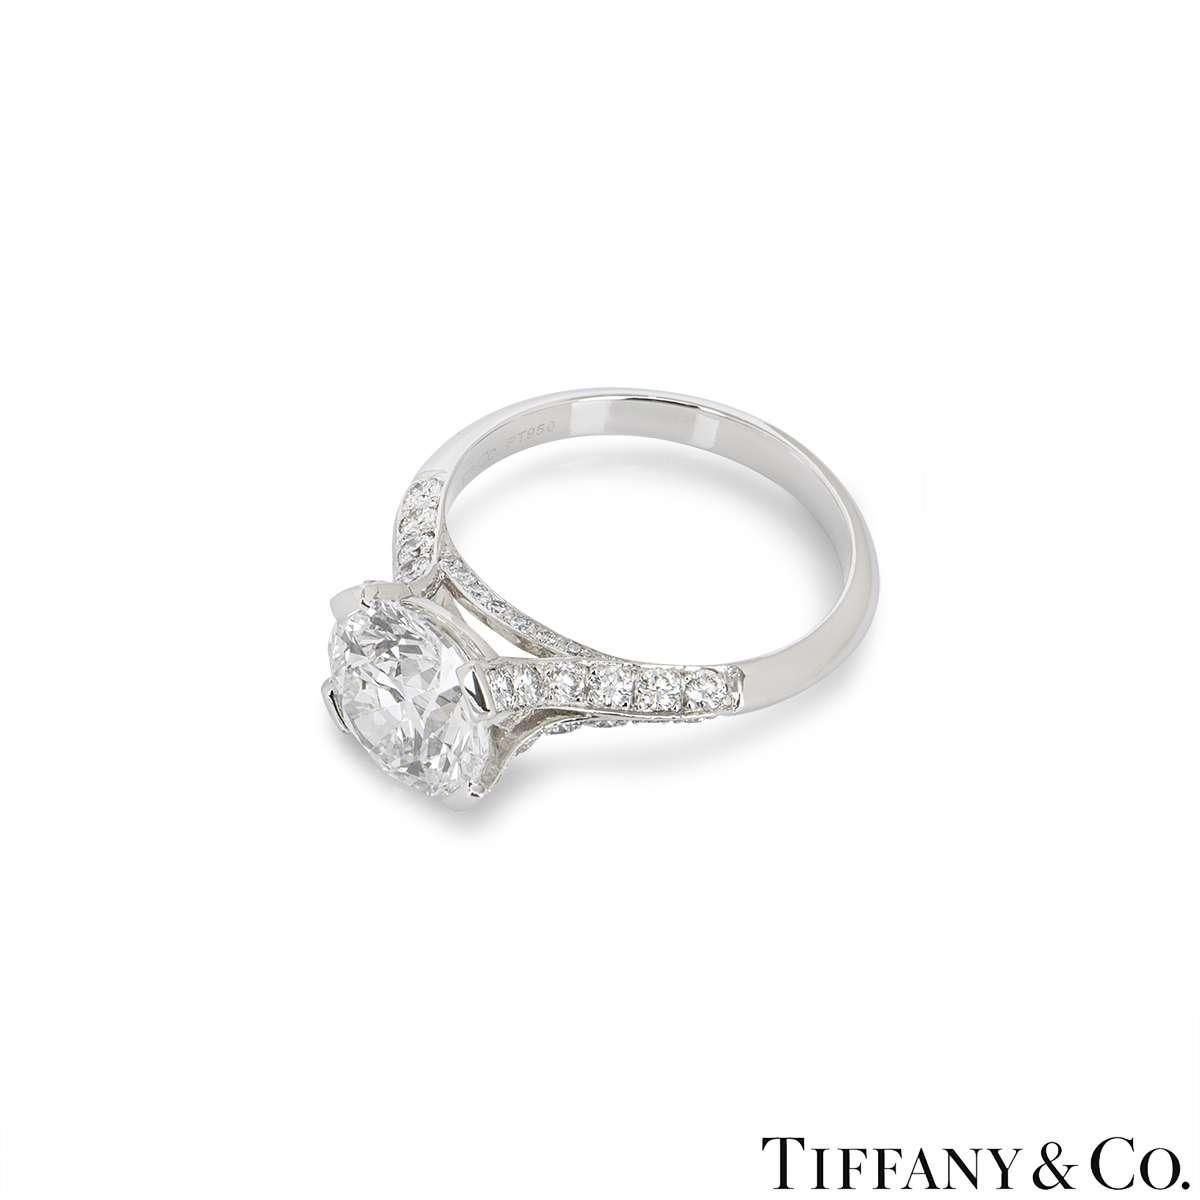 Tiffany & Co. Platinum Diamond Ring 2.23ct G/VVS1 XXX In Excellent Condition For Sale In London, GB